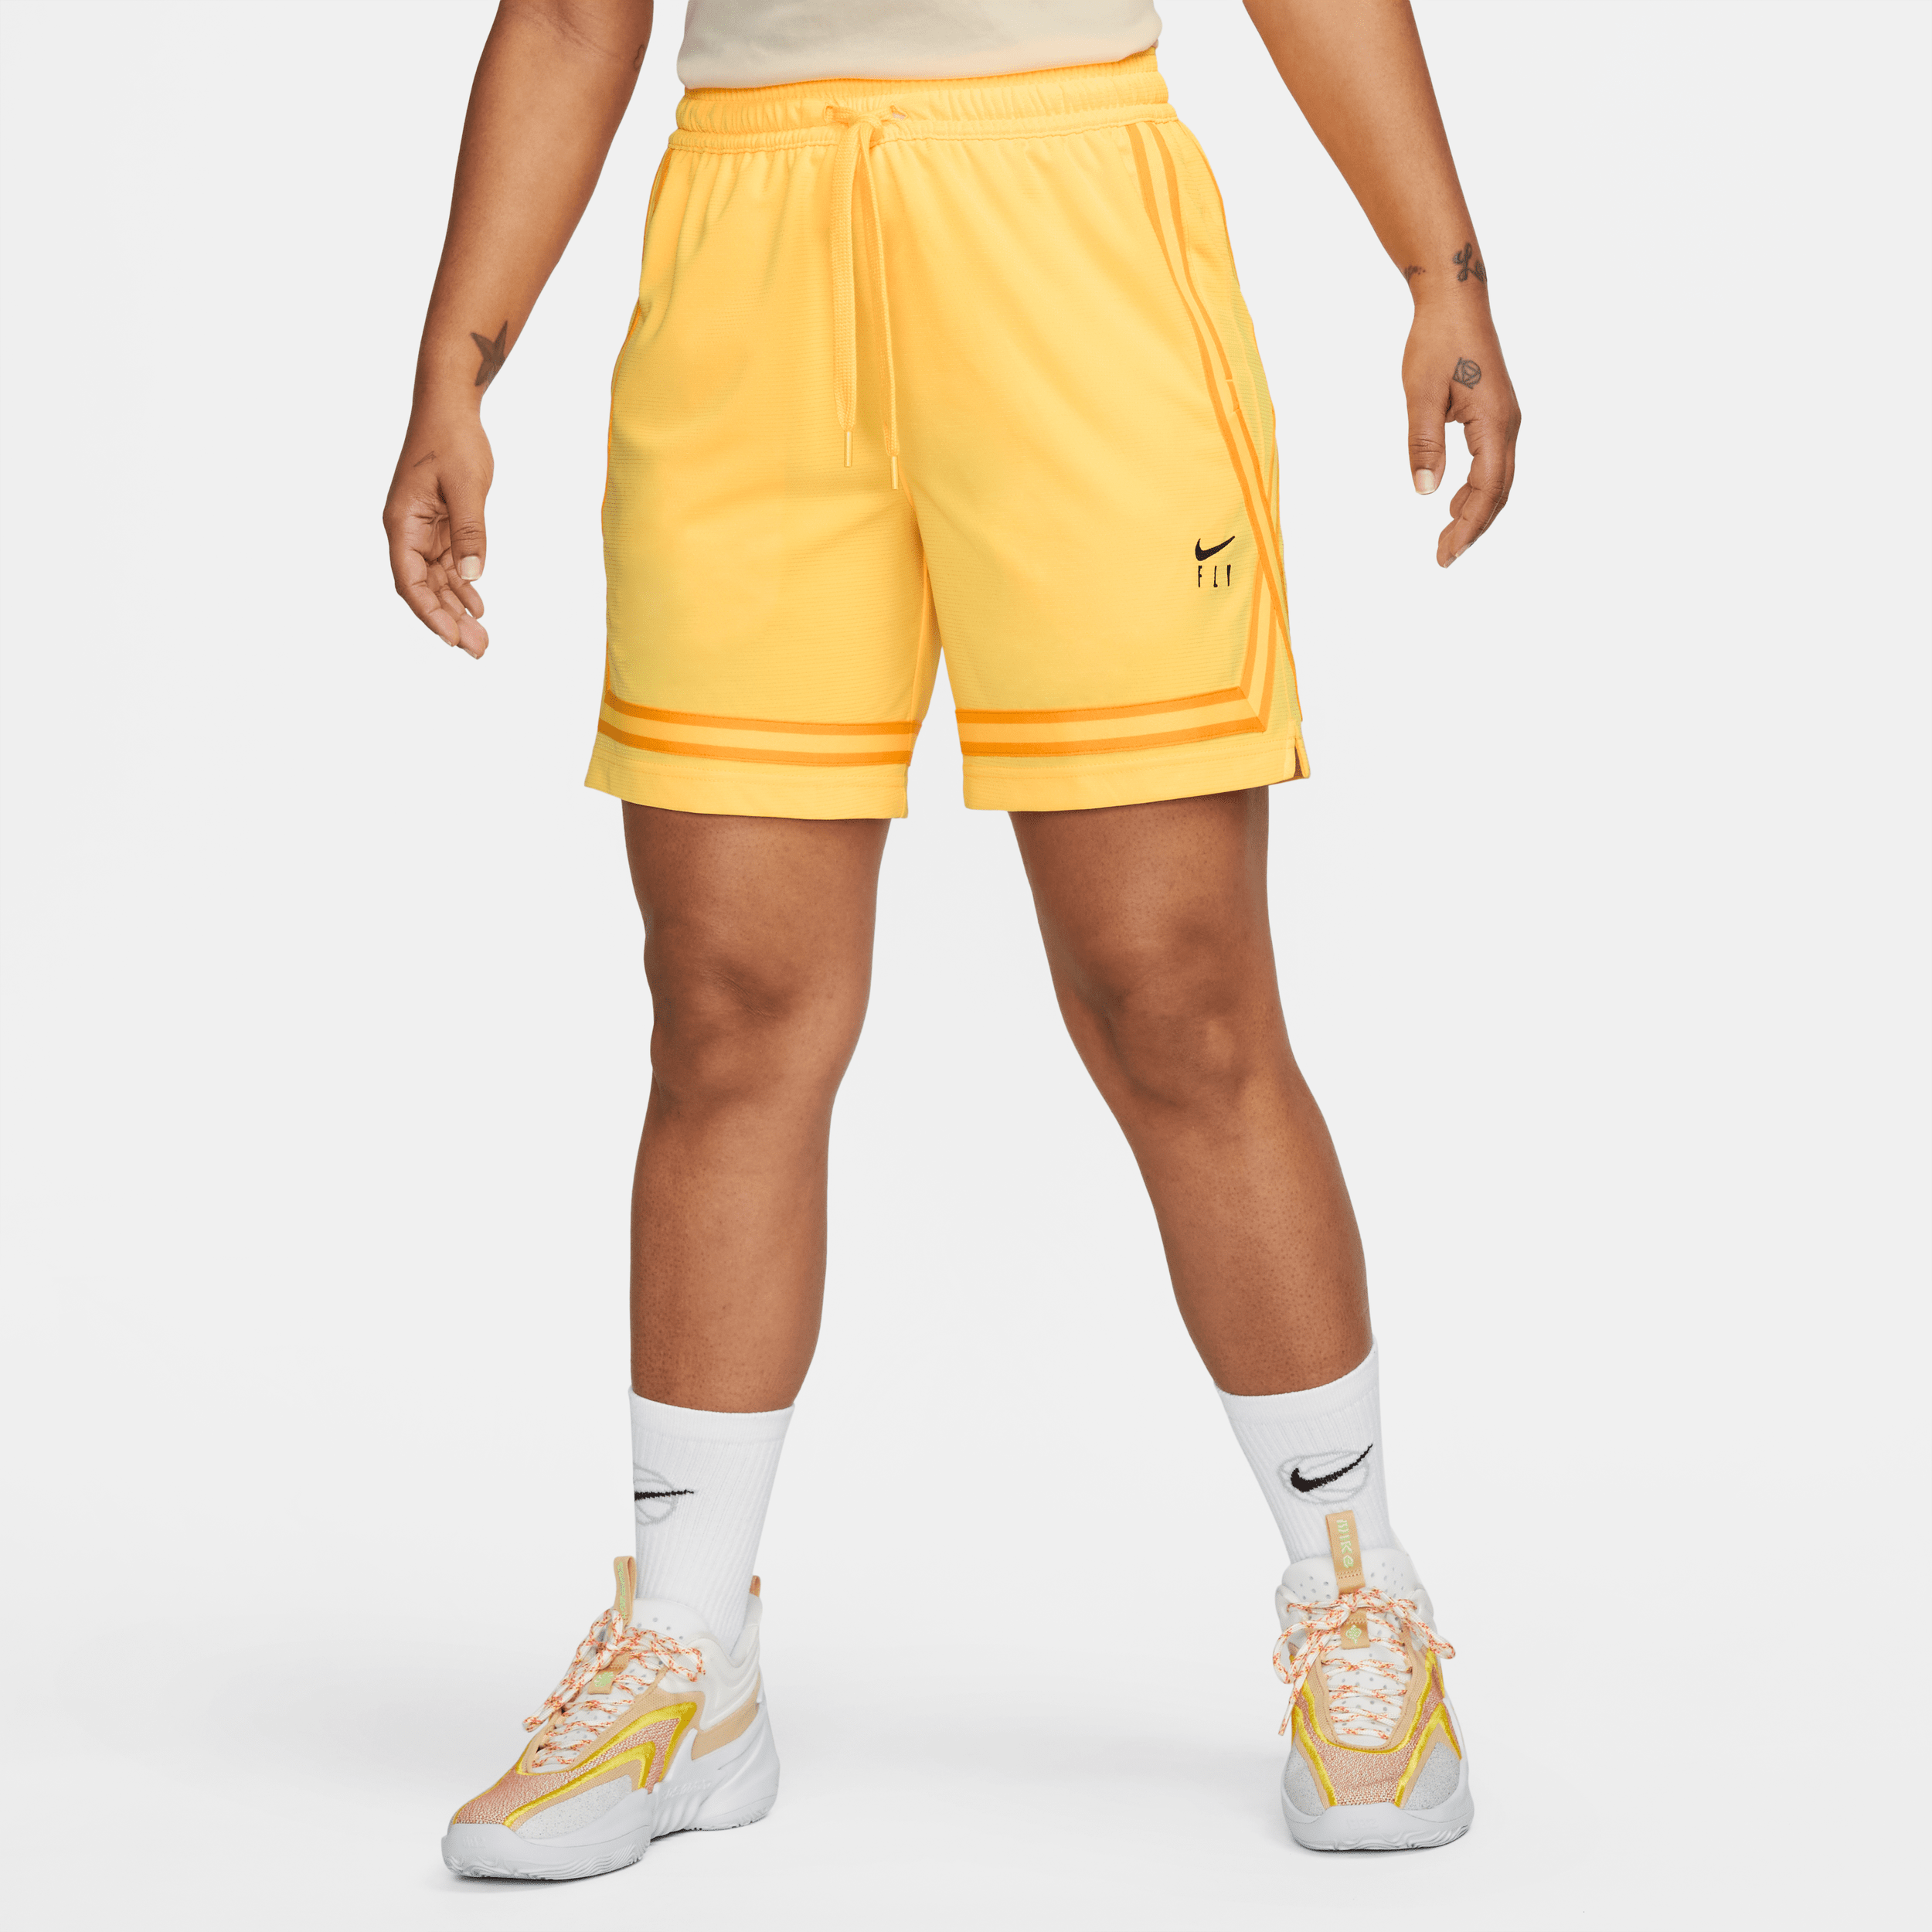 NIKE WOMEN'S FLY CROSSOVER BASKETBALL SHORTS,1009763307